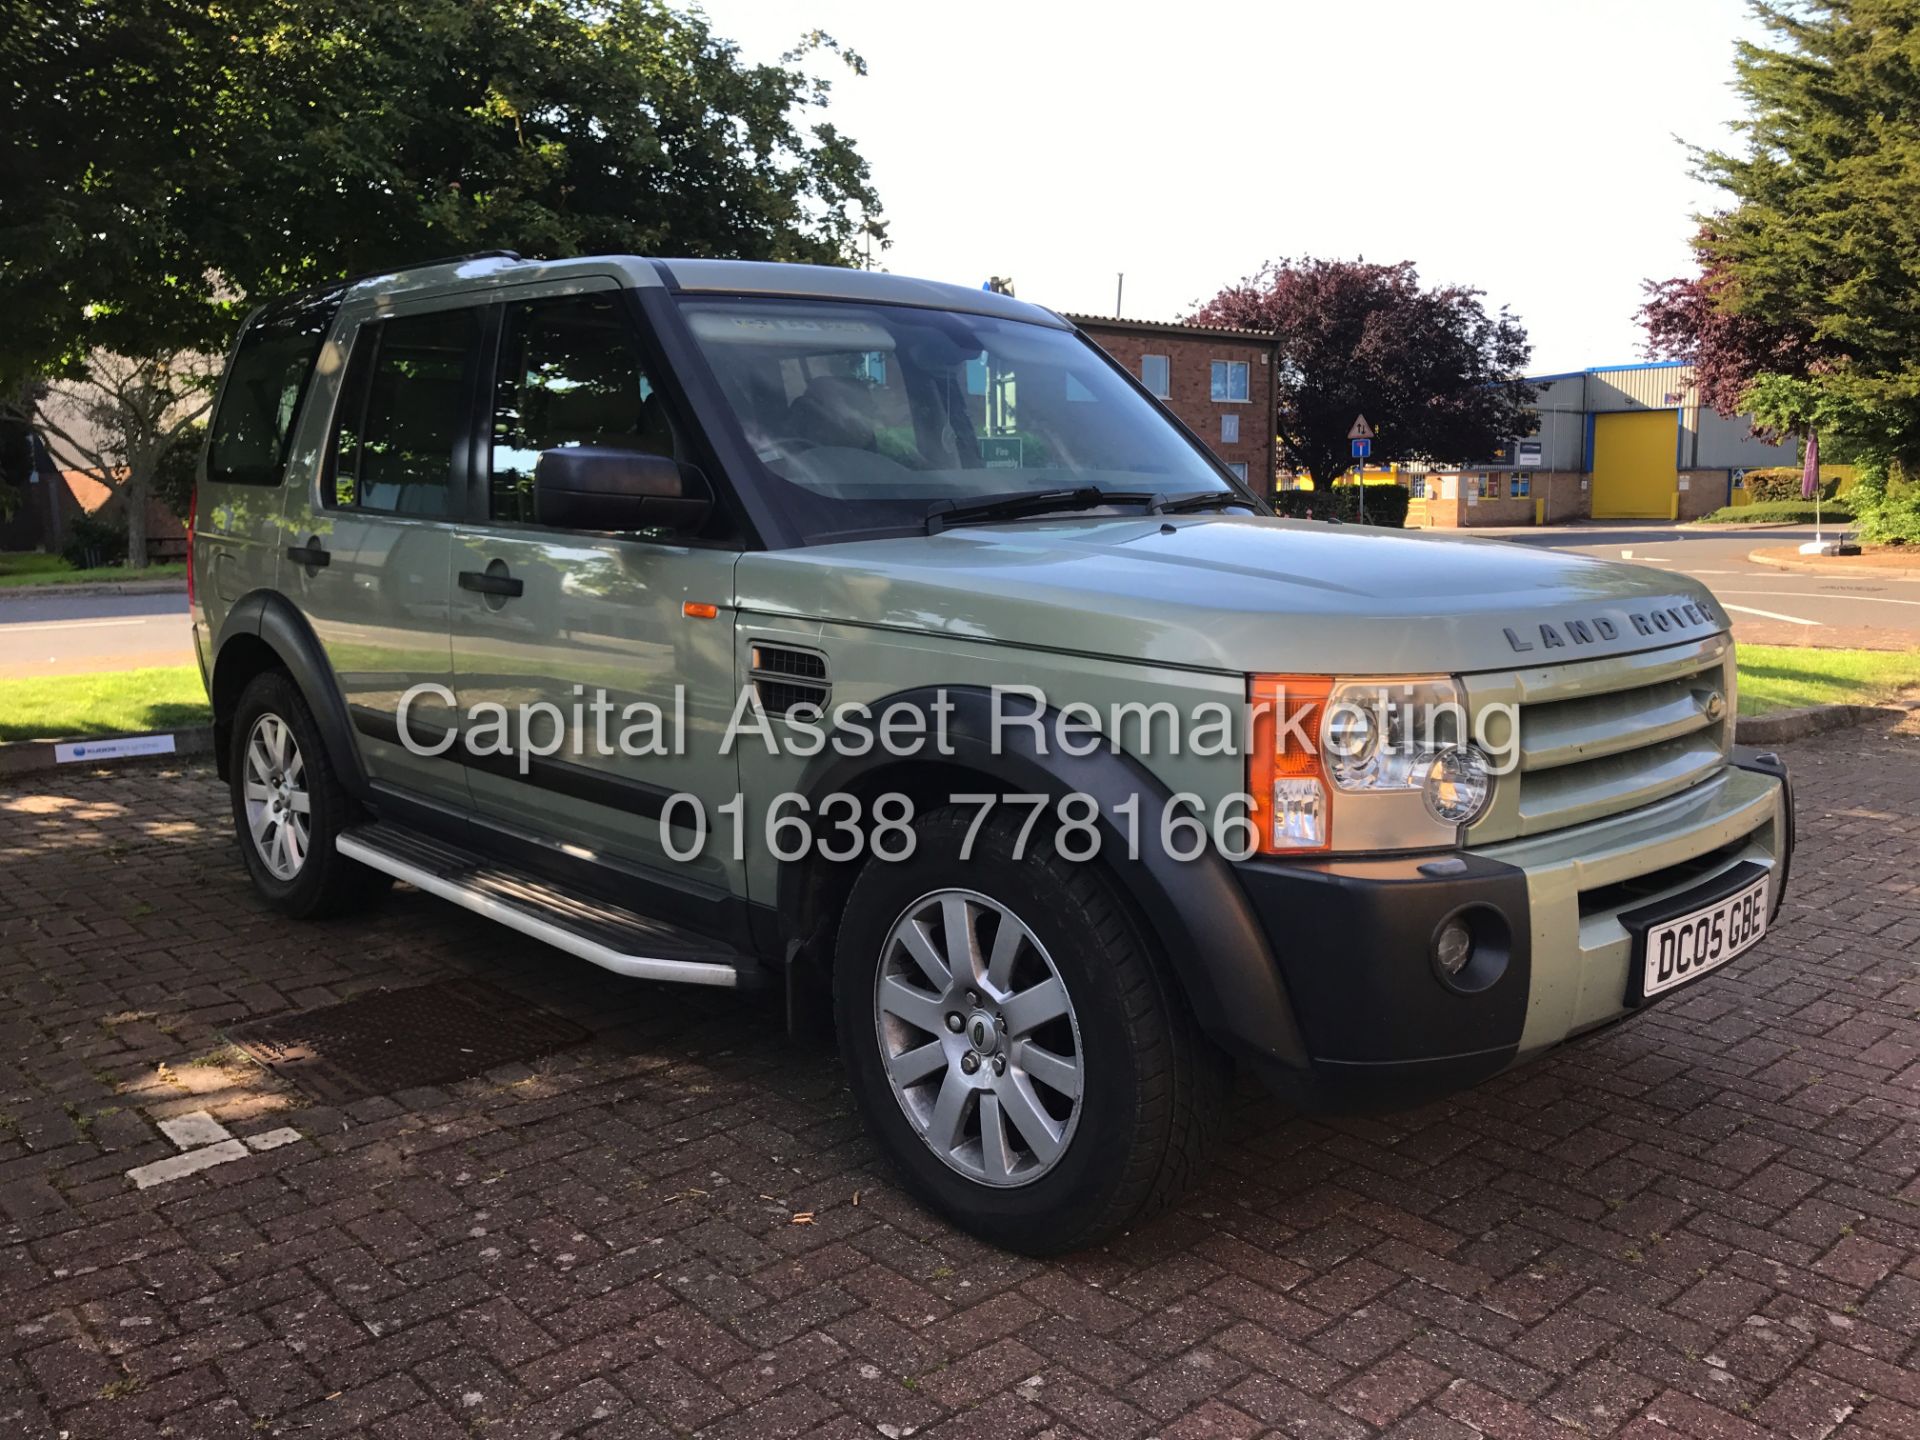 (ON SALE) LAND ROVER DISCOVERY TDV6 "SE 7 SEATER" GREAT SPEC - SAT NAV - FULL LEATHER - NO VAT - Image 2 of 28